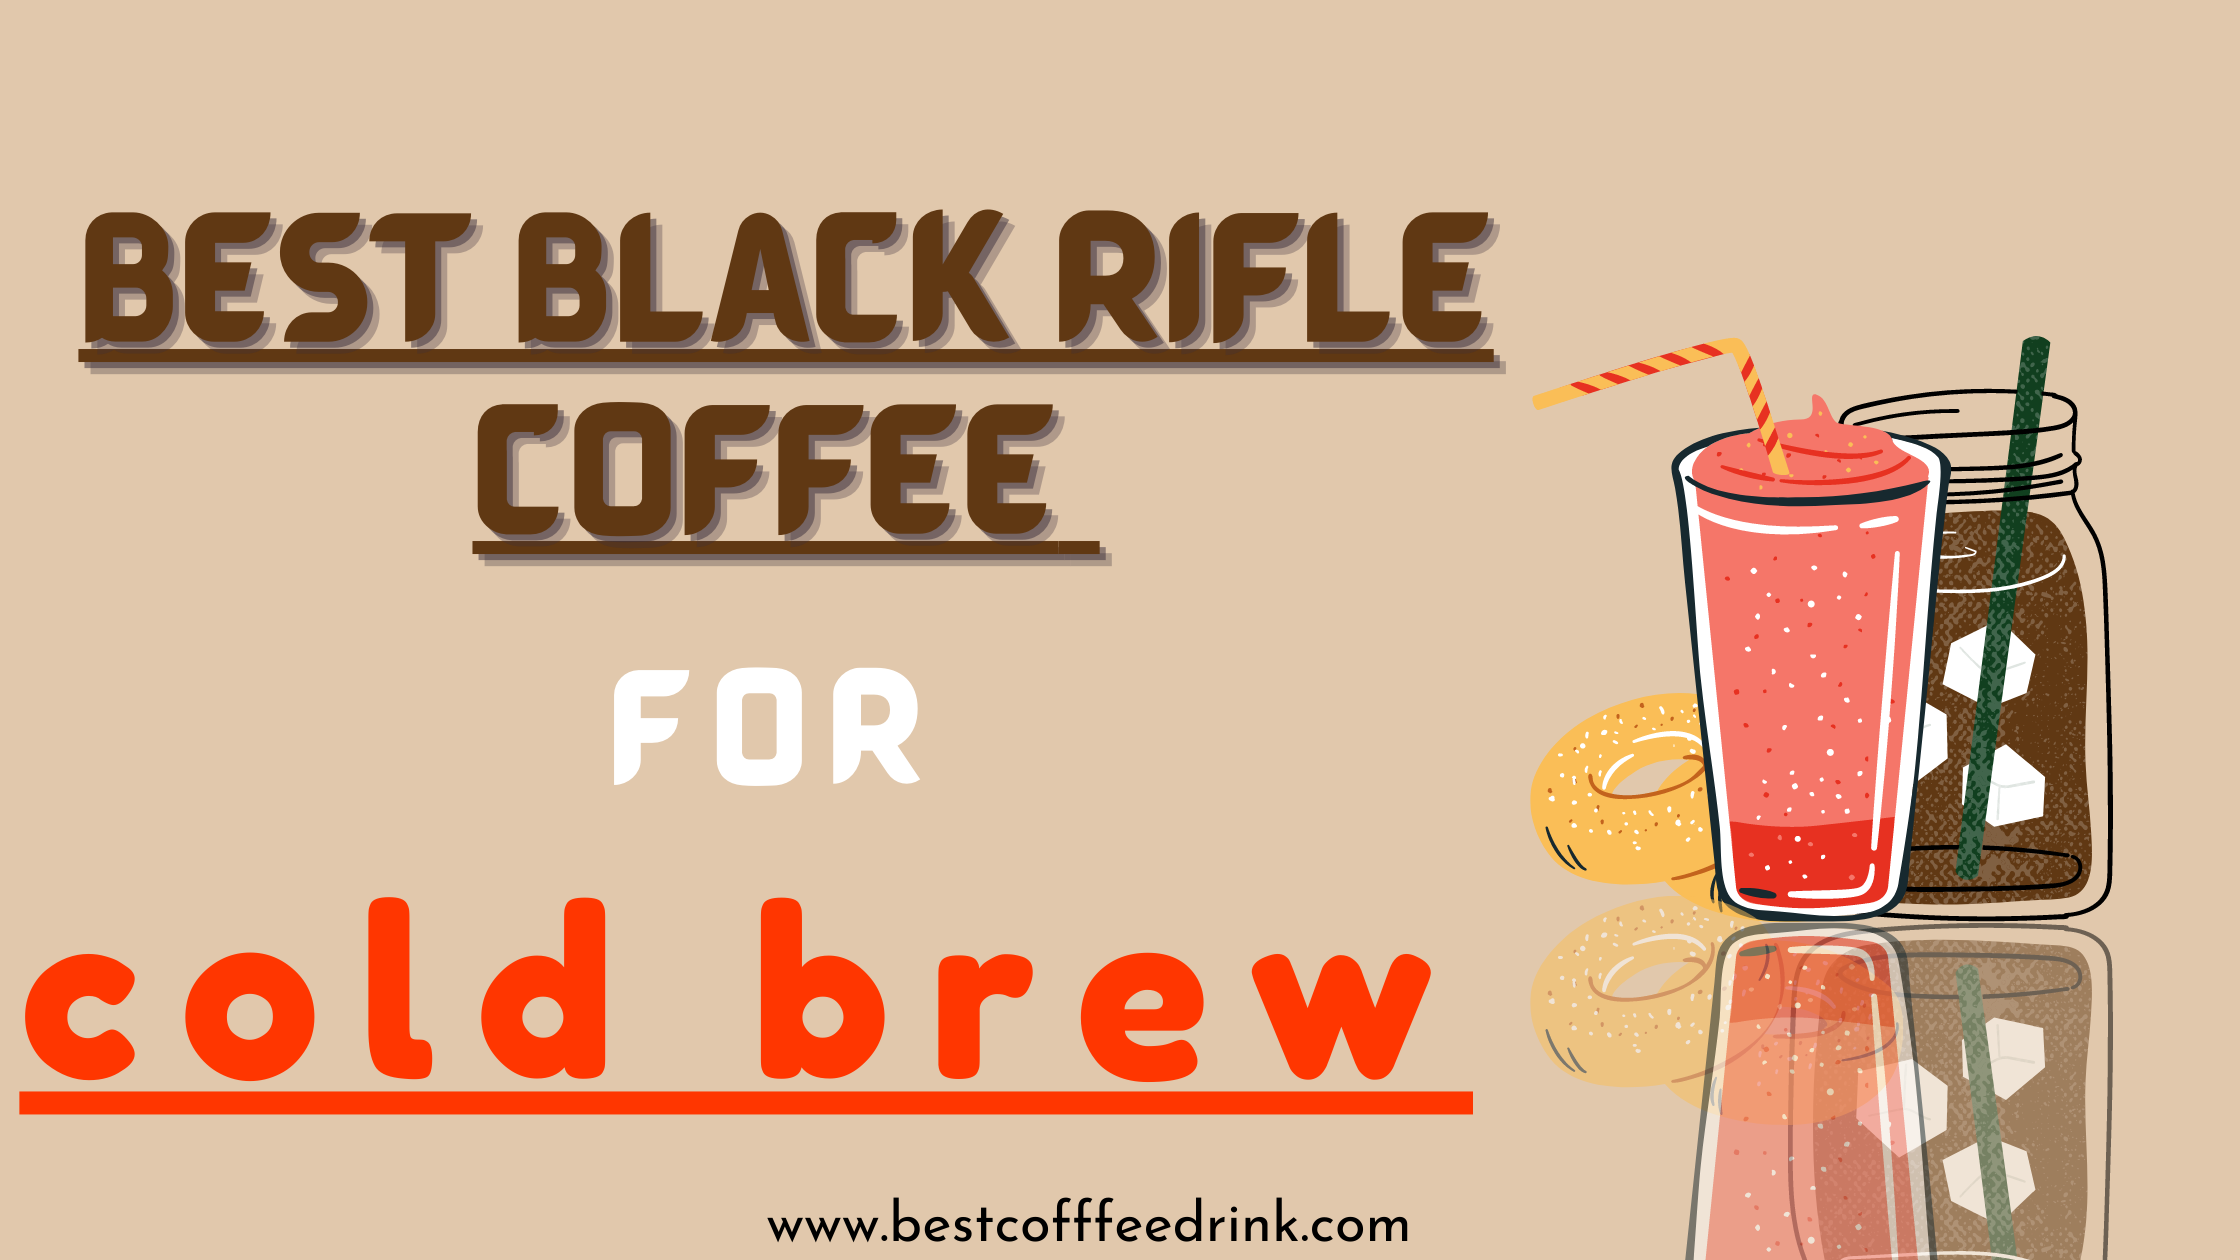 Best Black Rifle Coffee for Cold Brew